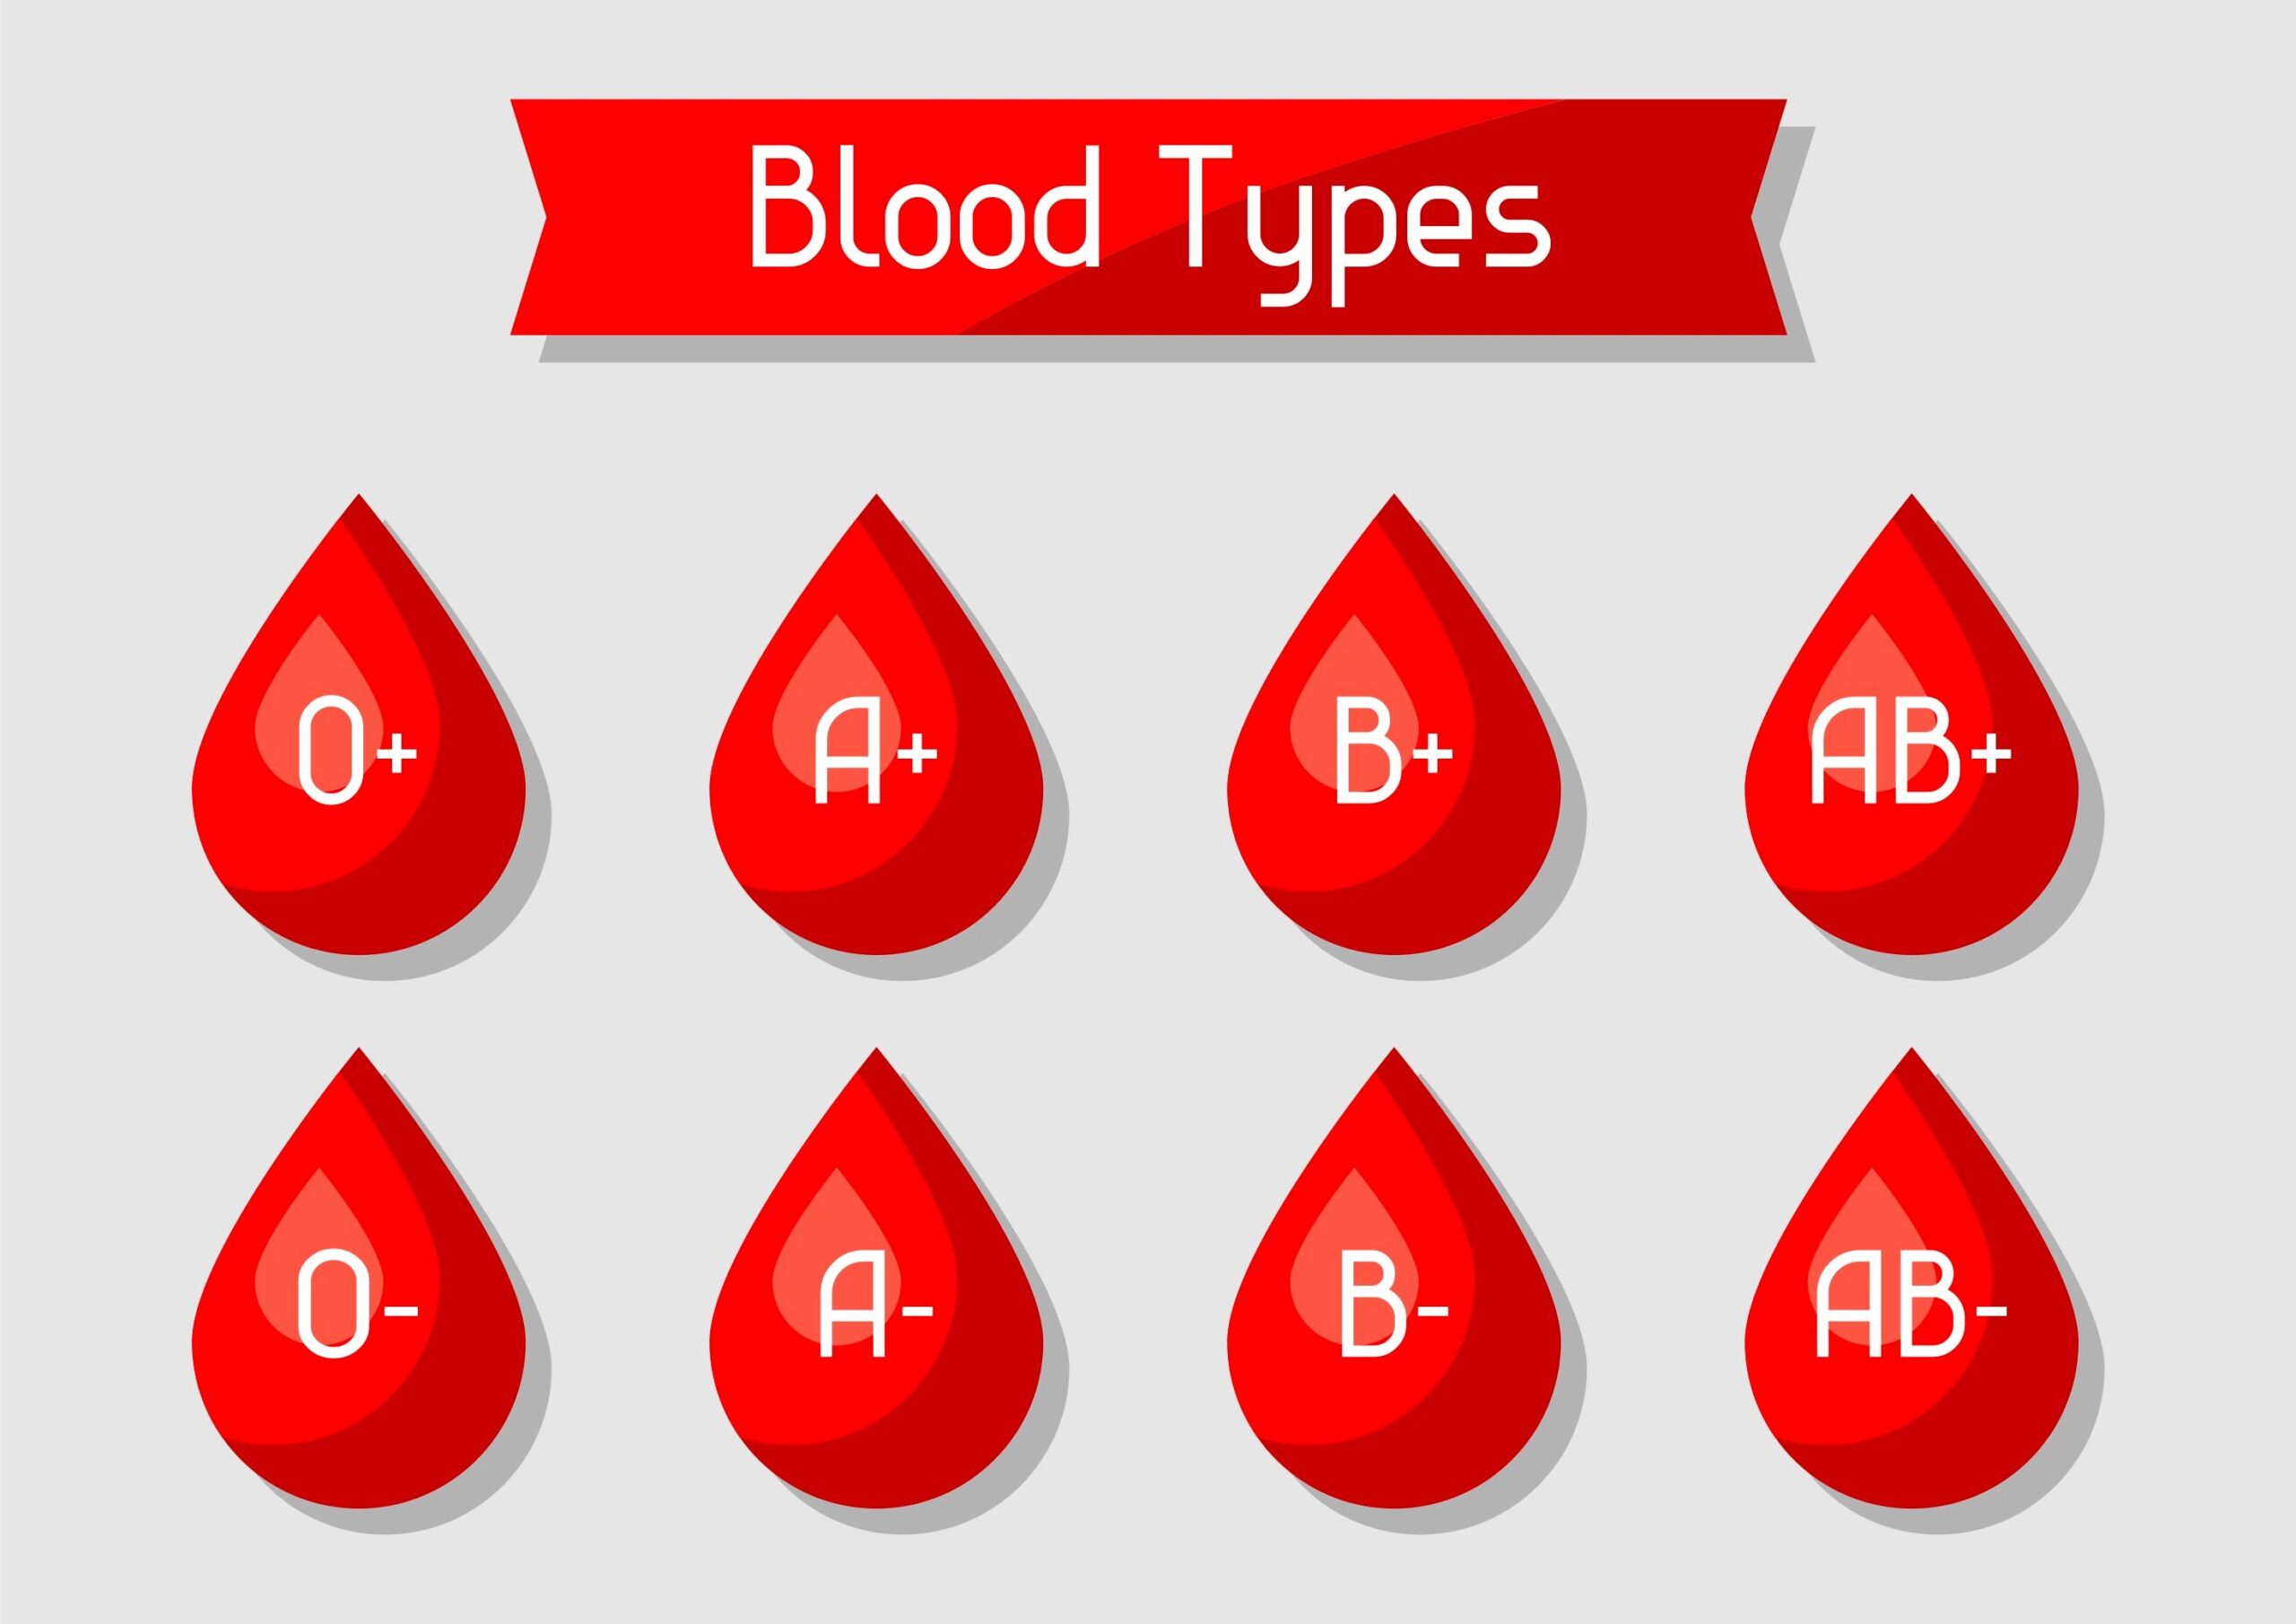 What’s Blood Type Got to Do With COVID-19?